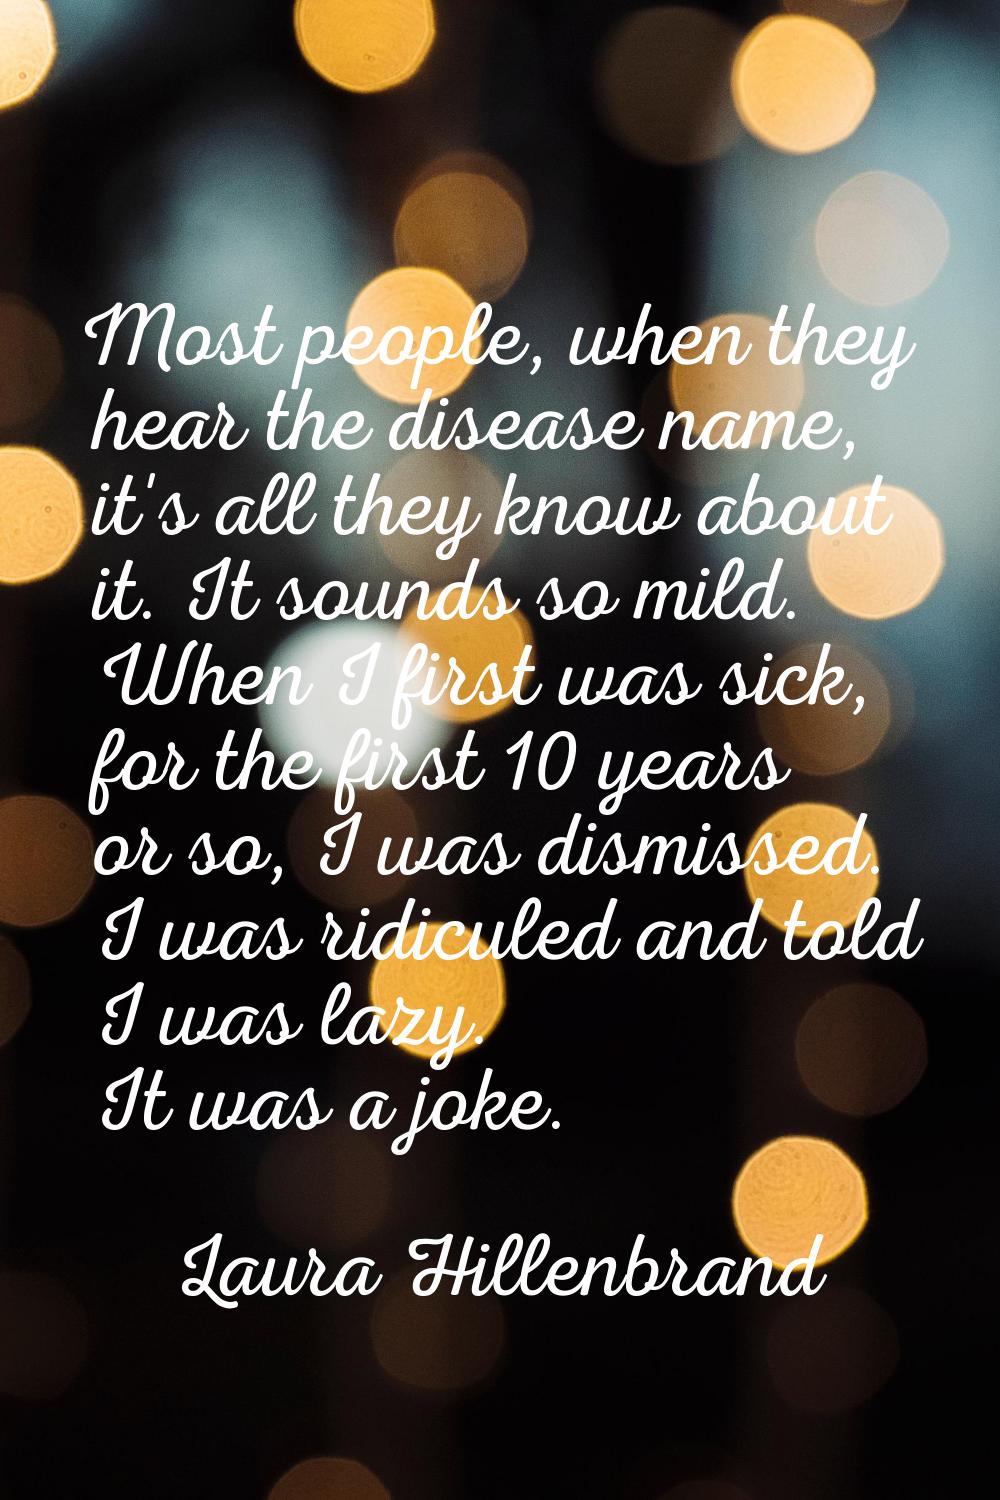 Most people, when they hear the disease name, it's all they know about it. It sounds so mild. When 